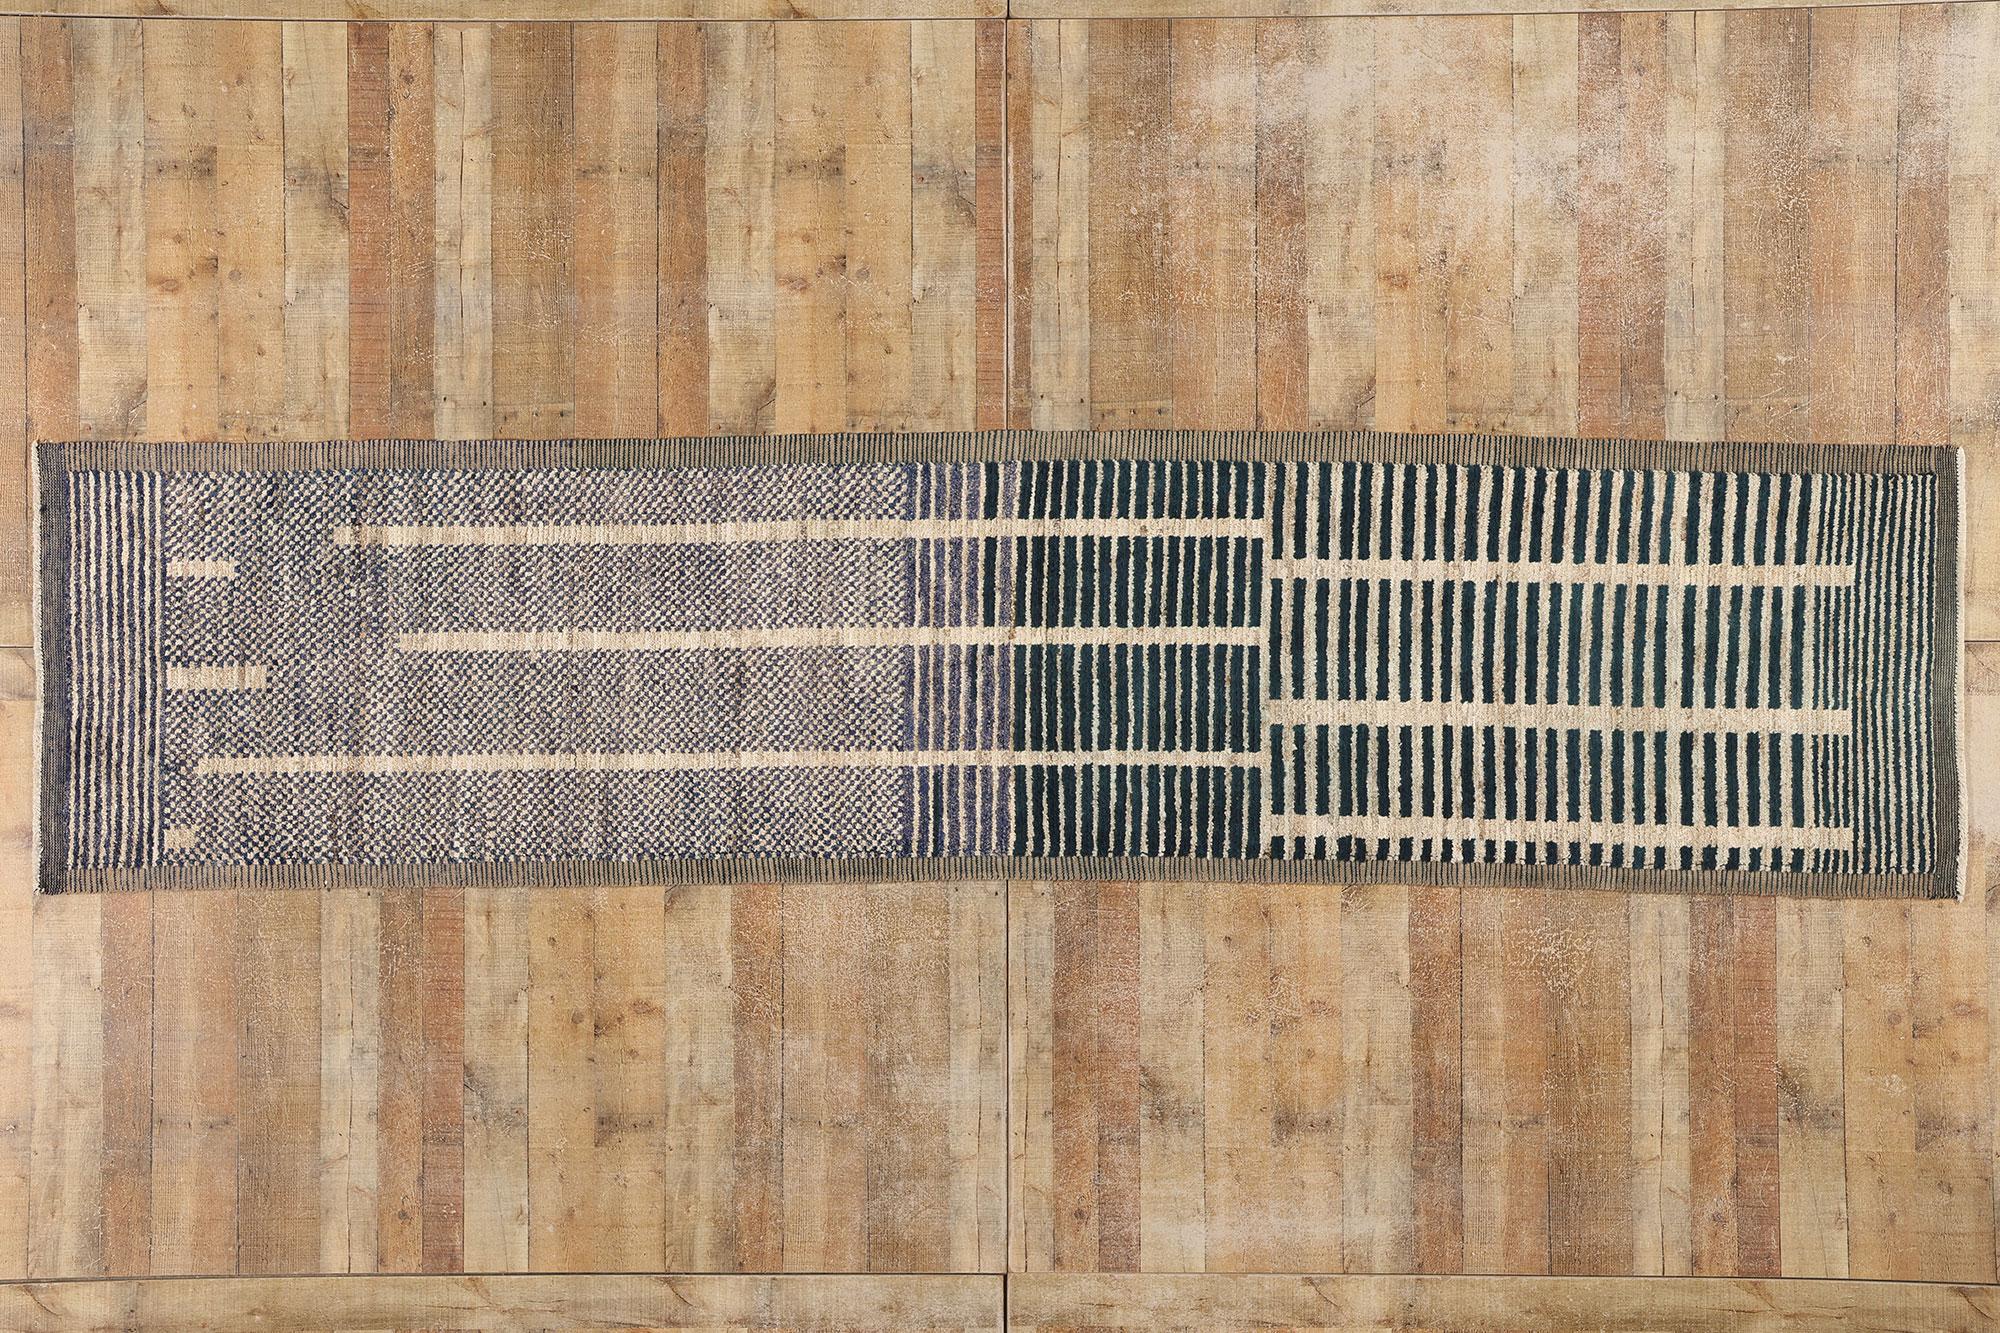 81074 Organic Modern Brutalist Moroccan Rug Runner, 02'11 x 12'02. Step into the esoteric design realm infused with the iconic aesthetics of De Stijl and Brutalism in this hand knotted wool organic modern Moroccan rug runner. This exquisite piece is